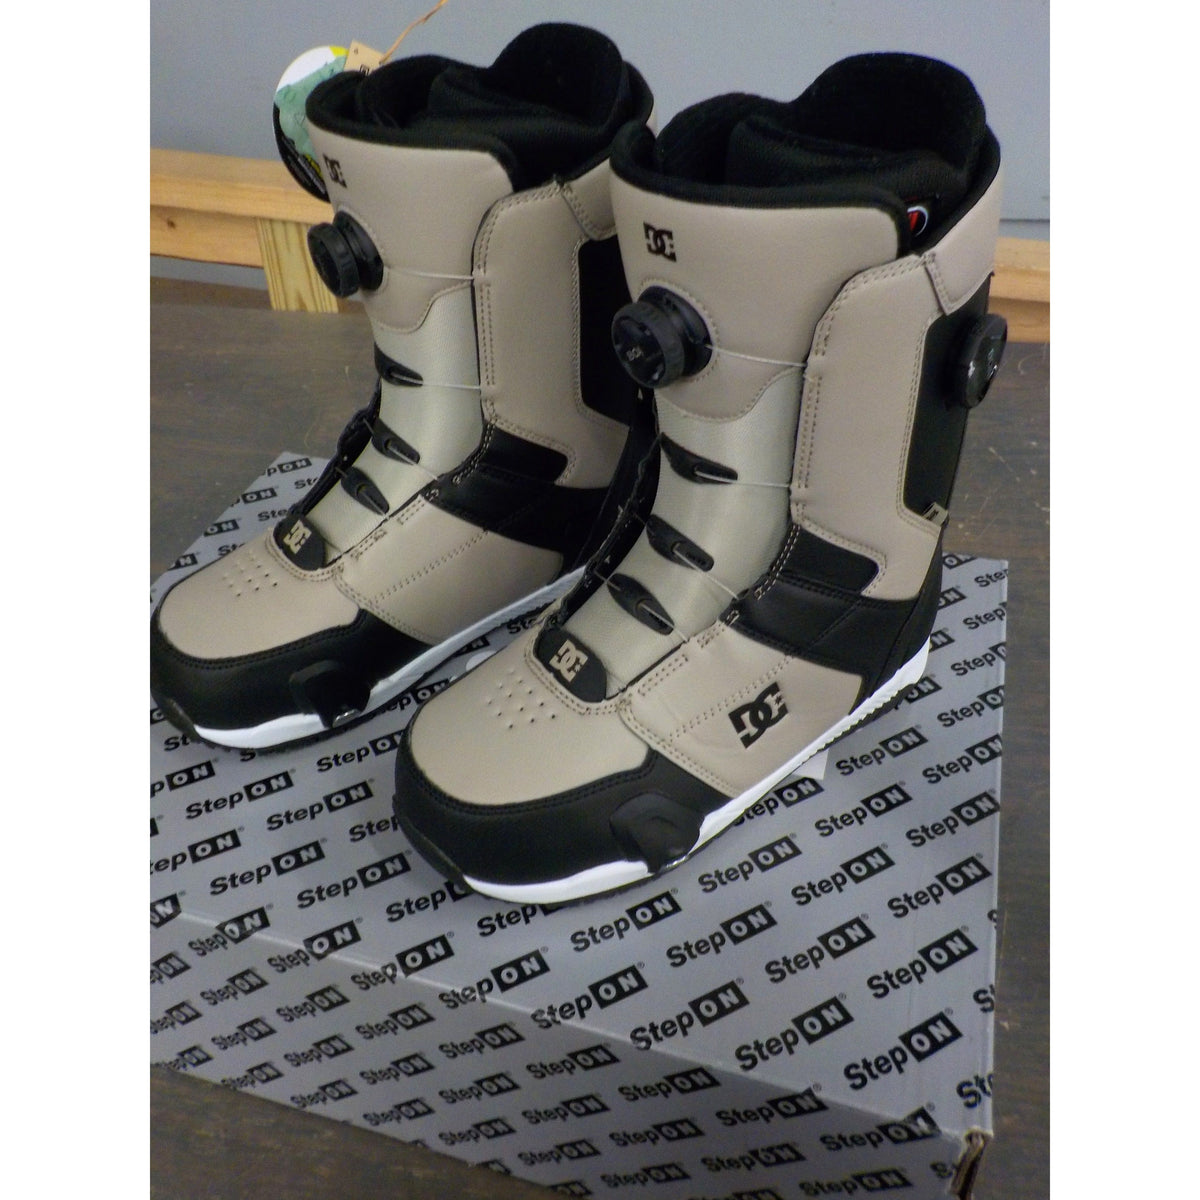 DC Men&#39;s Control Step On Snowboard Boots - Light Brown/White - 11.5 - Used - Acceptable